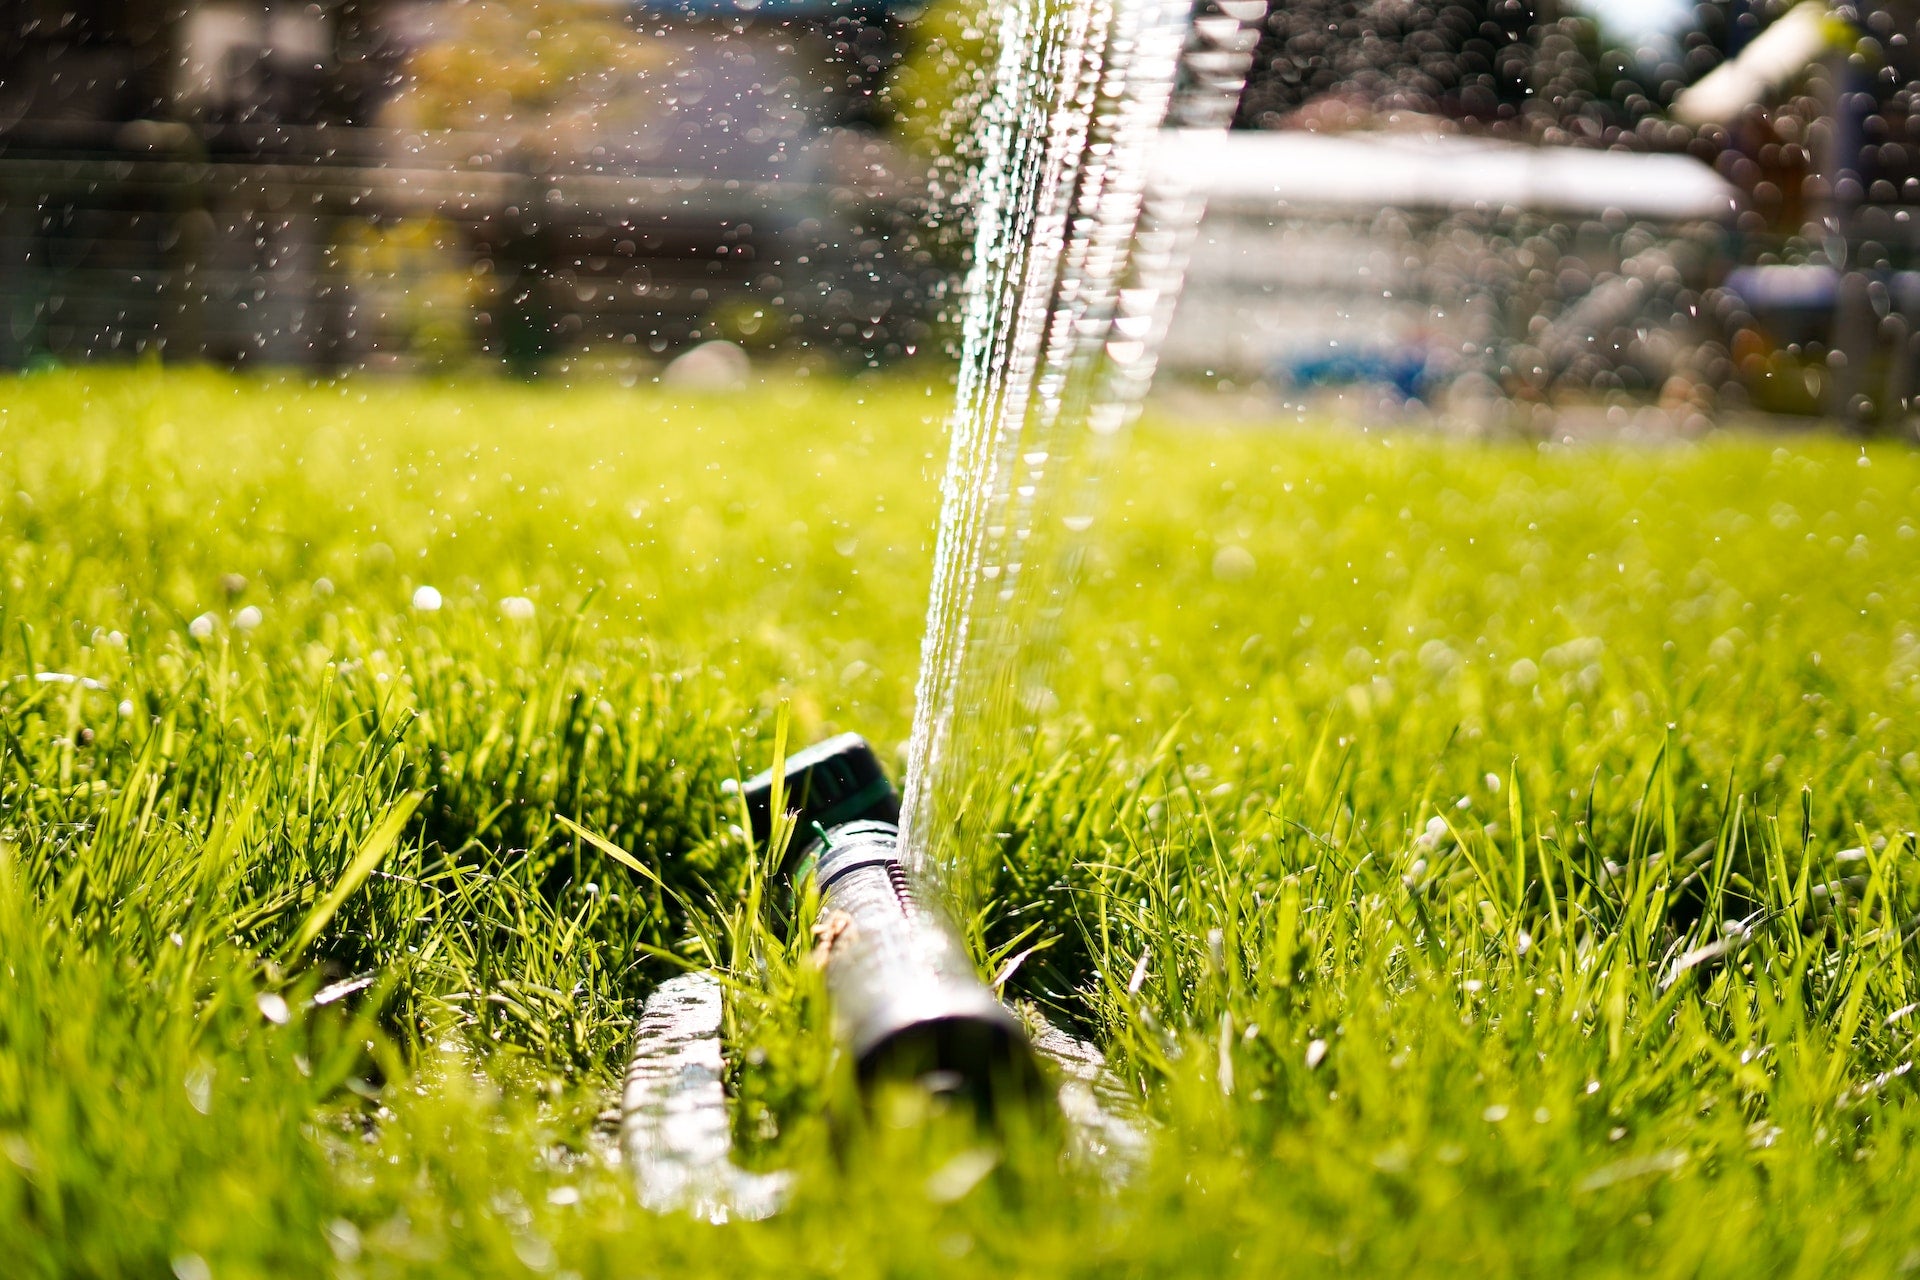 How much do I need to water my lawn during a heatwave?